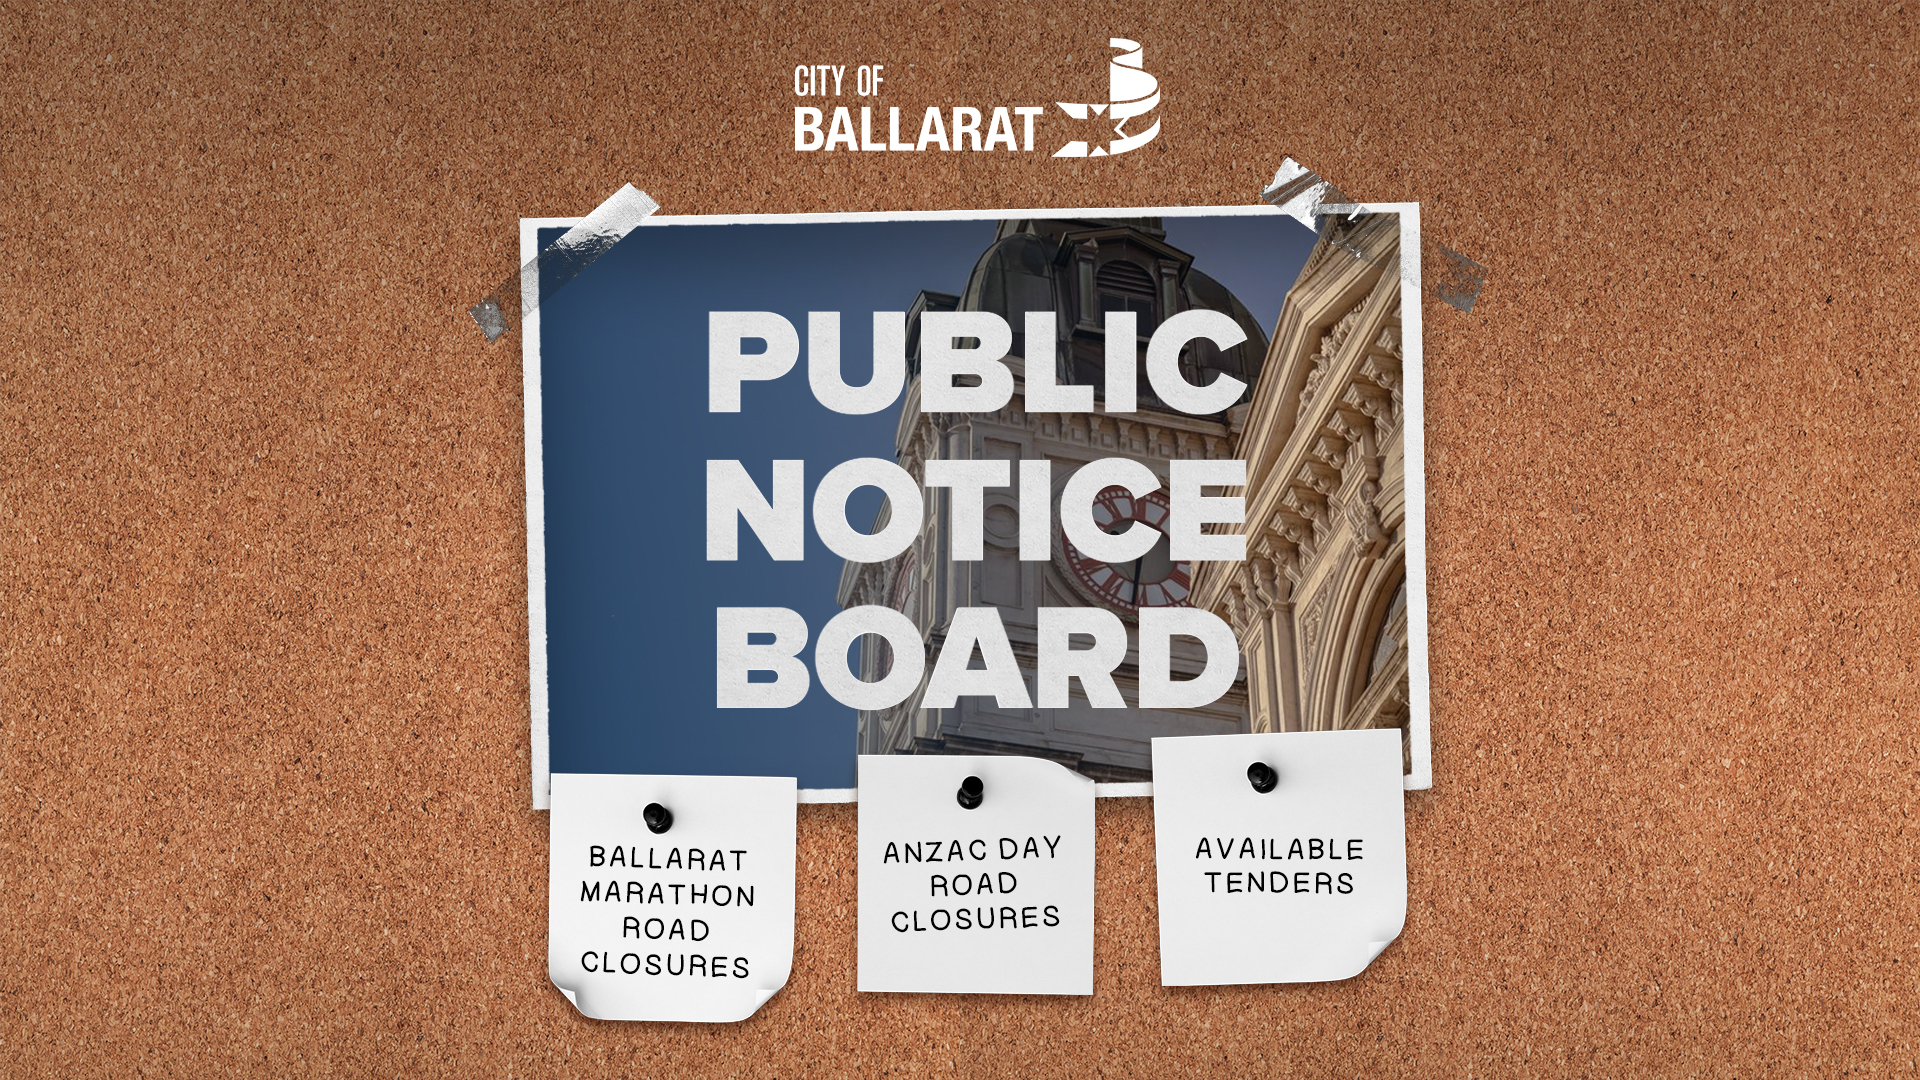 Notice board with Public Notice Board text over an image of Ballarat Town Hall. Three notes underneath with text saying Ballarat Marathon Road Closures, ANZAC Day Road Closures, Available Tenders